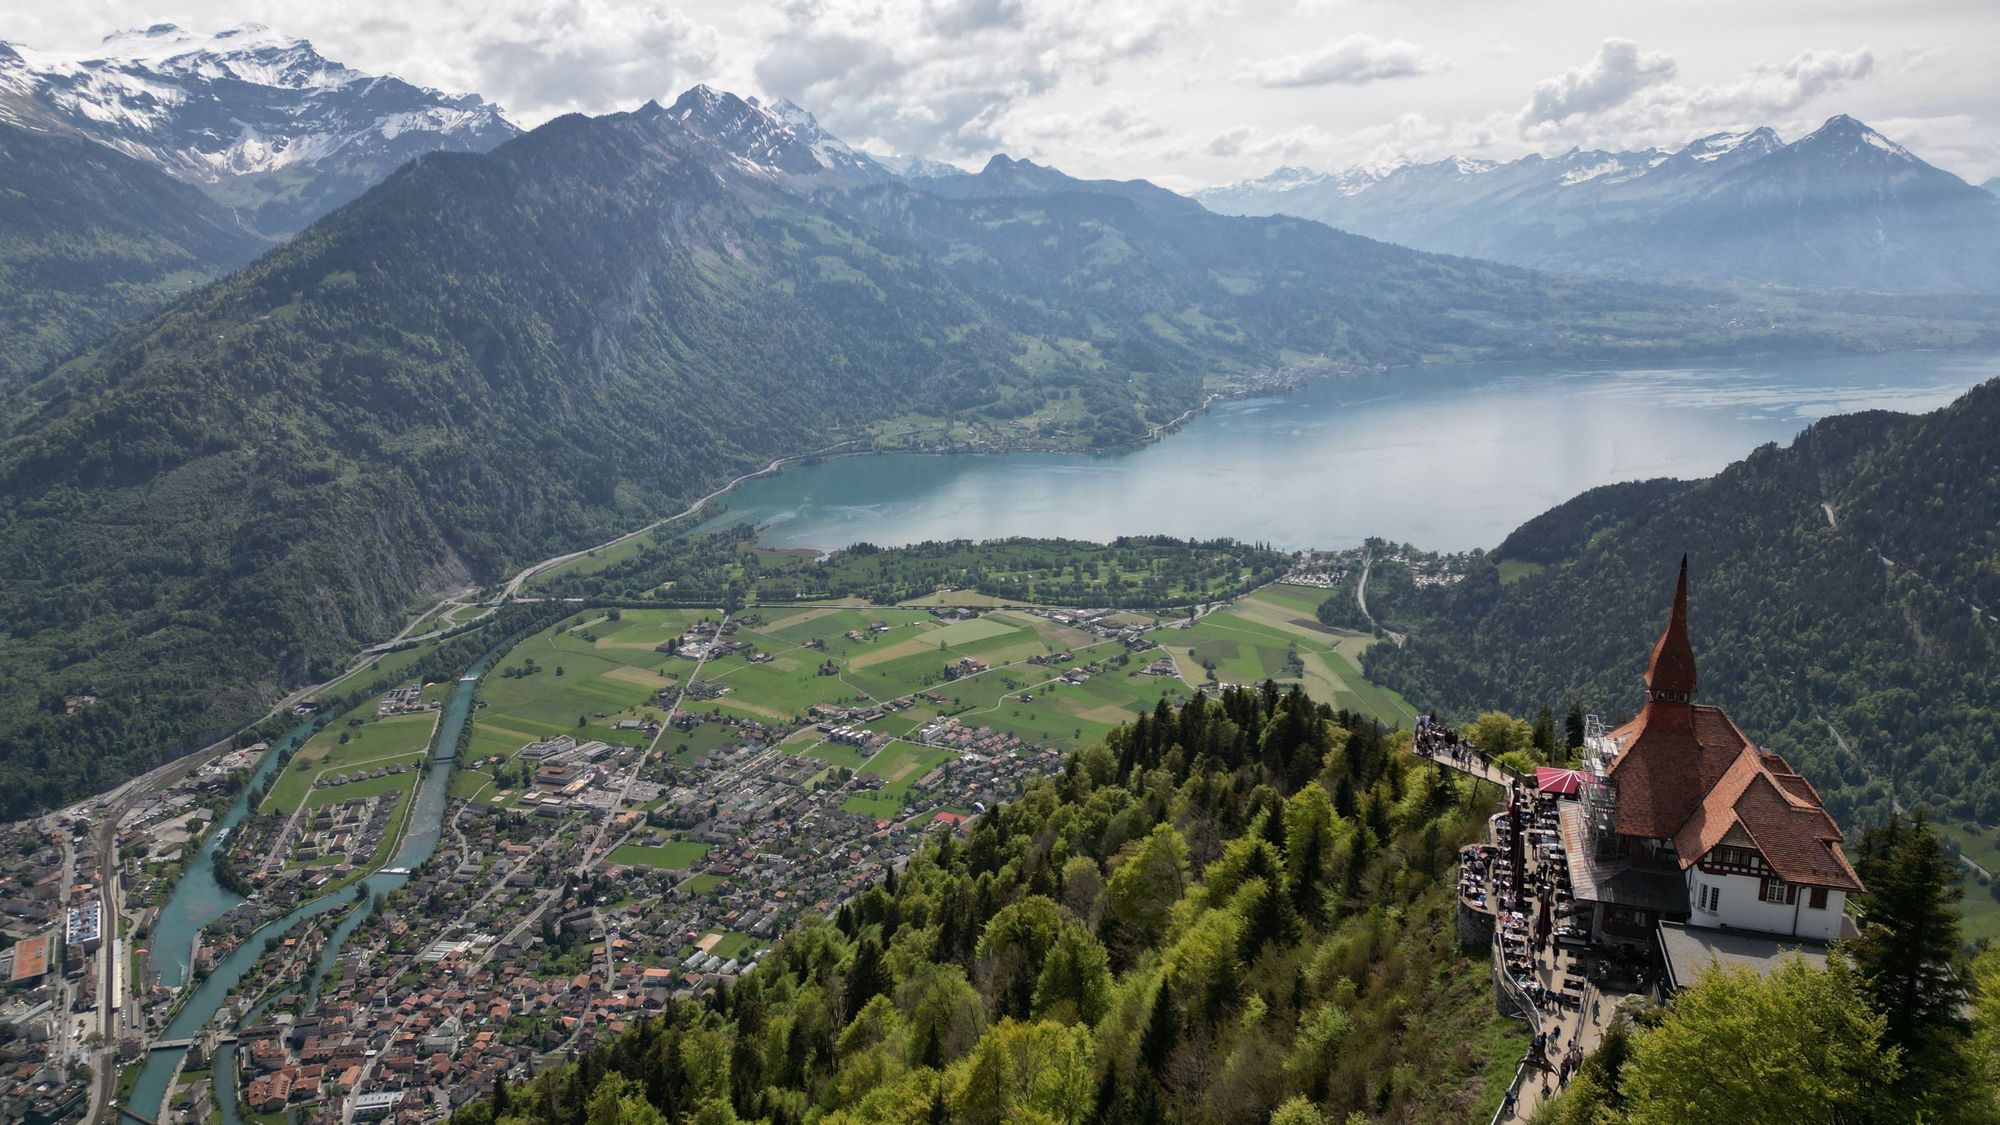 An aerial view of Harder Kulm looking back down to the town and lake in the valley. Photo: Getty